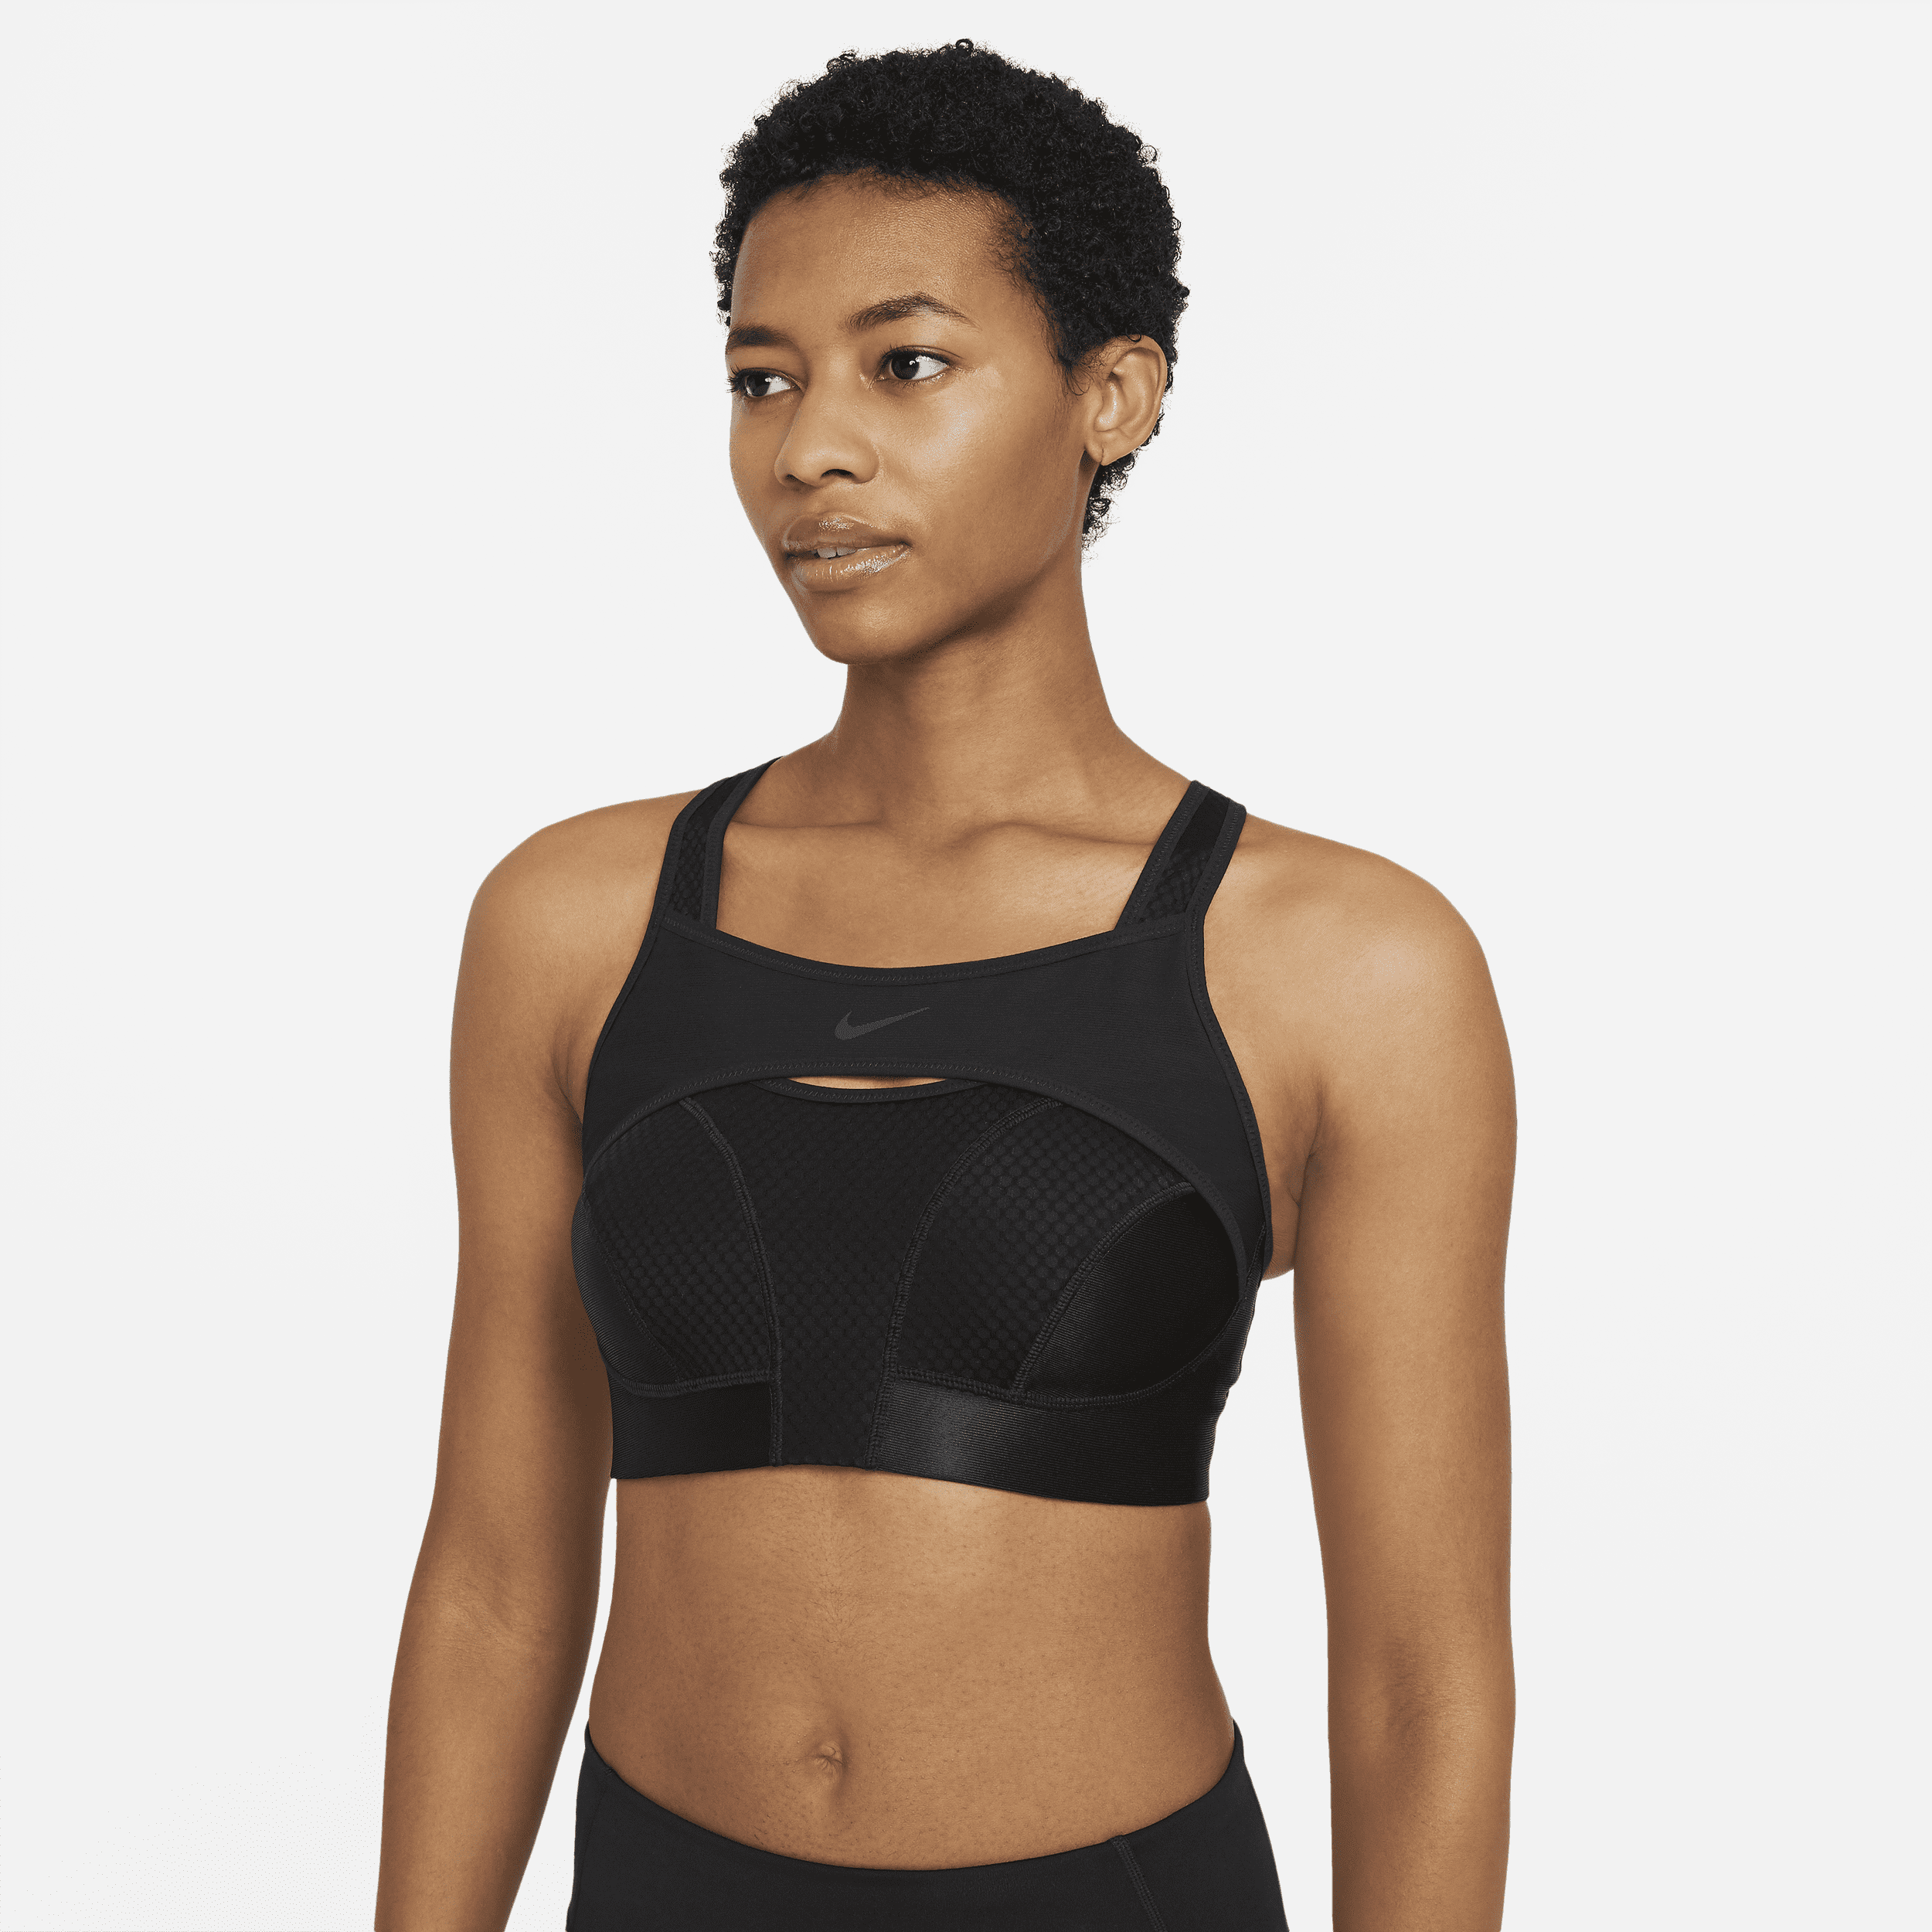 Take sweat out of the equation with the Nike Alpha UltraBreathe Sports Bra. Our highest level of support comes in an ultralight and breezy design that dries fast to keep you comfortable and focused. The overlay across the chest minimises bounce, prevents spillage and adds an extra layer of support so you can feel confident while you move. Ultralight Breathability::Nike Dri-FIT ADV technology combines moisture-wicking fabric with advanced engineering and features to help you stay dry and comfortable.,Movement Ready::The high-support design gives you added coverage at the neckline without feeling restrictive for high-intensity workouts.,Adjustable Comfort::Adjustable straps let you fine-tune your most comfortable fit. A double closure on the back allows for easy on and off. Product Details::Tight fit for a body-hugging feelMoulded cupsBody: 81% nylon/19% elastane. Panels: 100% polyester. Upper Front and Back Panel/Panel lining: 78% polyester/22% elastane. Binding: 76% nylon/24% elastane.Machine washImported